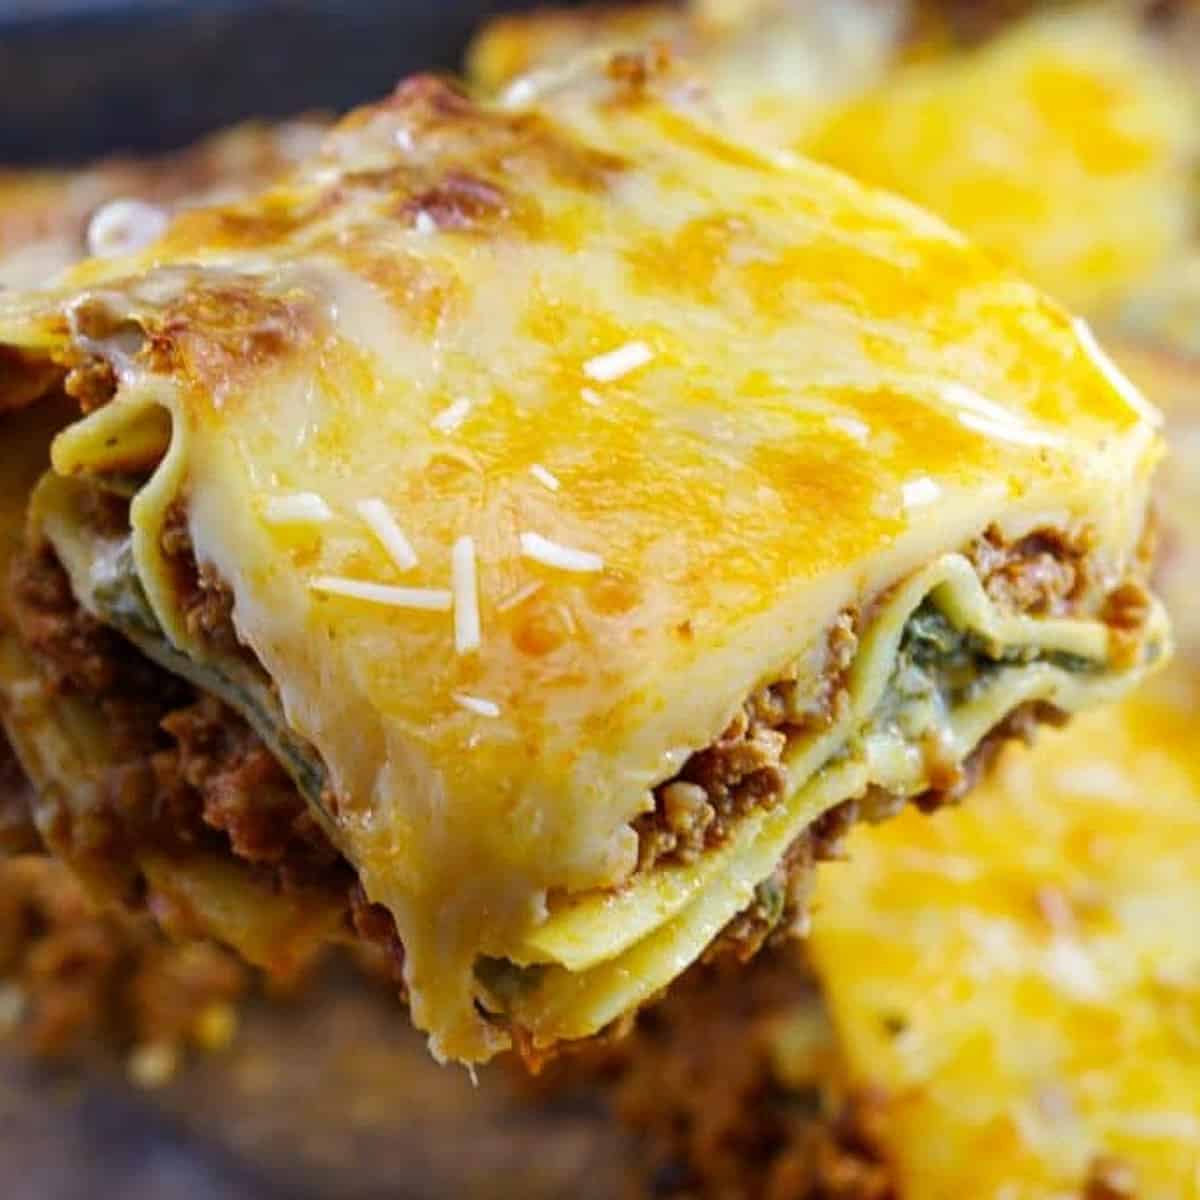 piece of lasagna being held up over container of lasagna